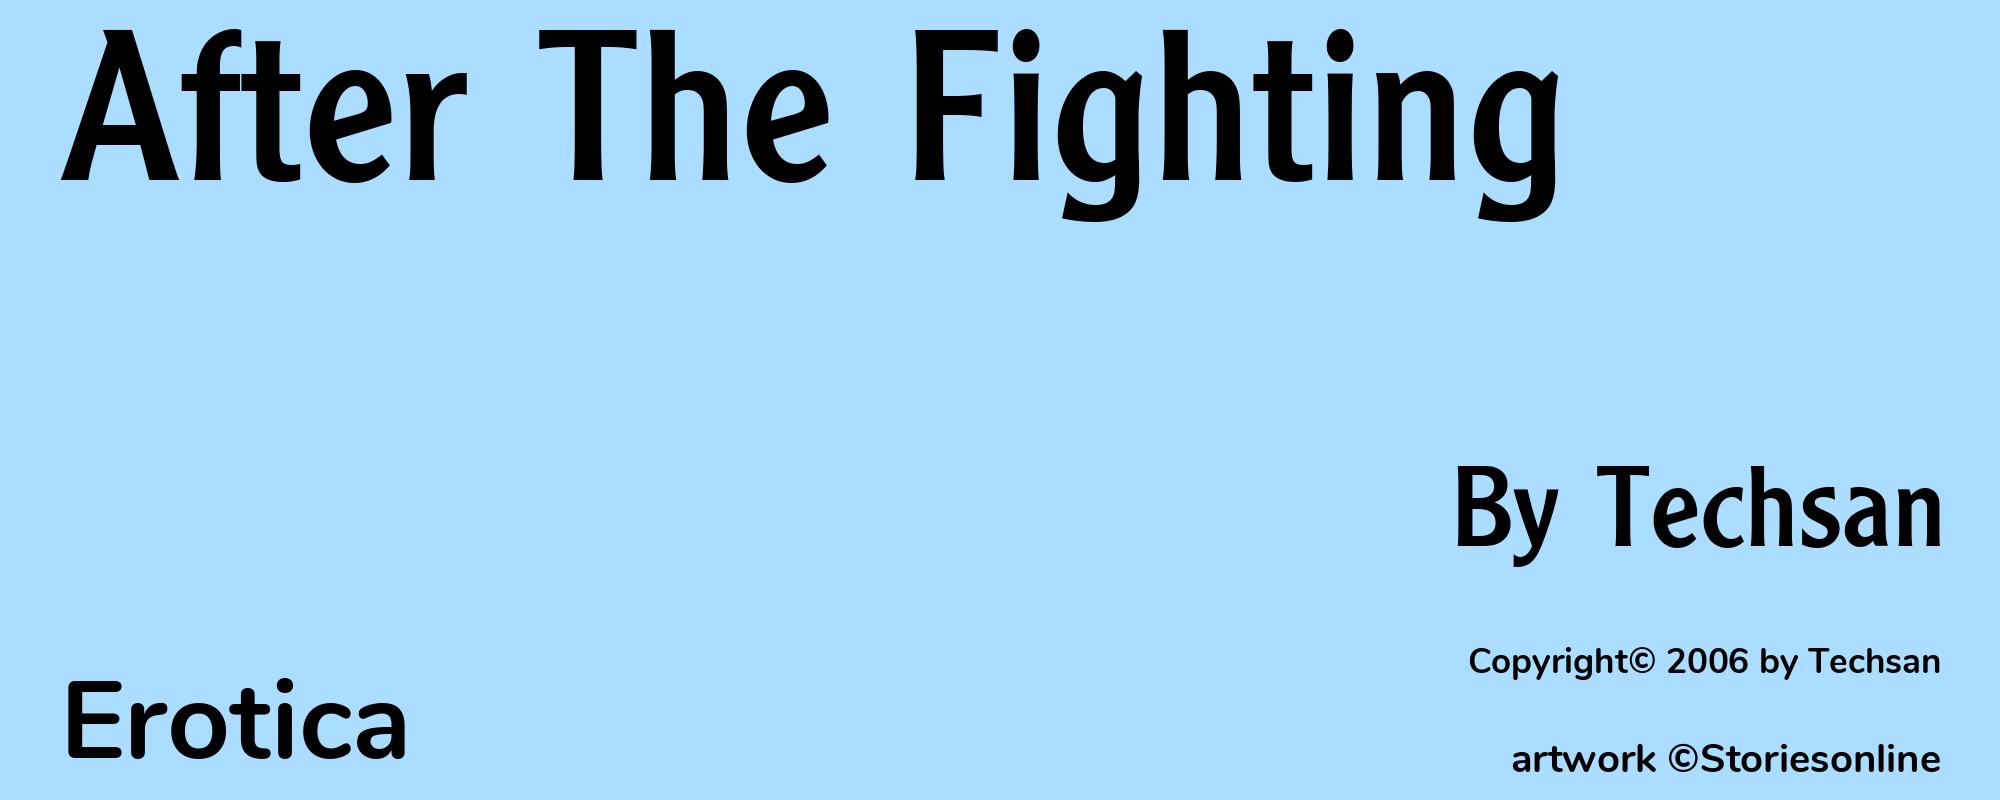 After The Fighting - Cover